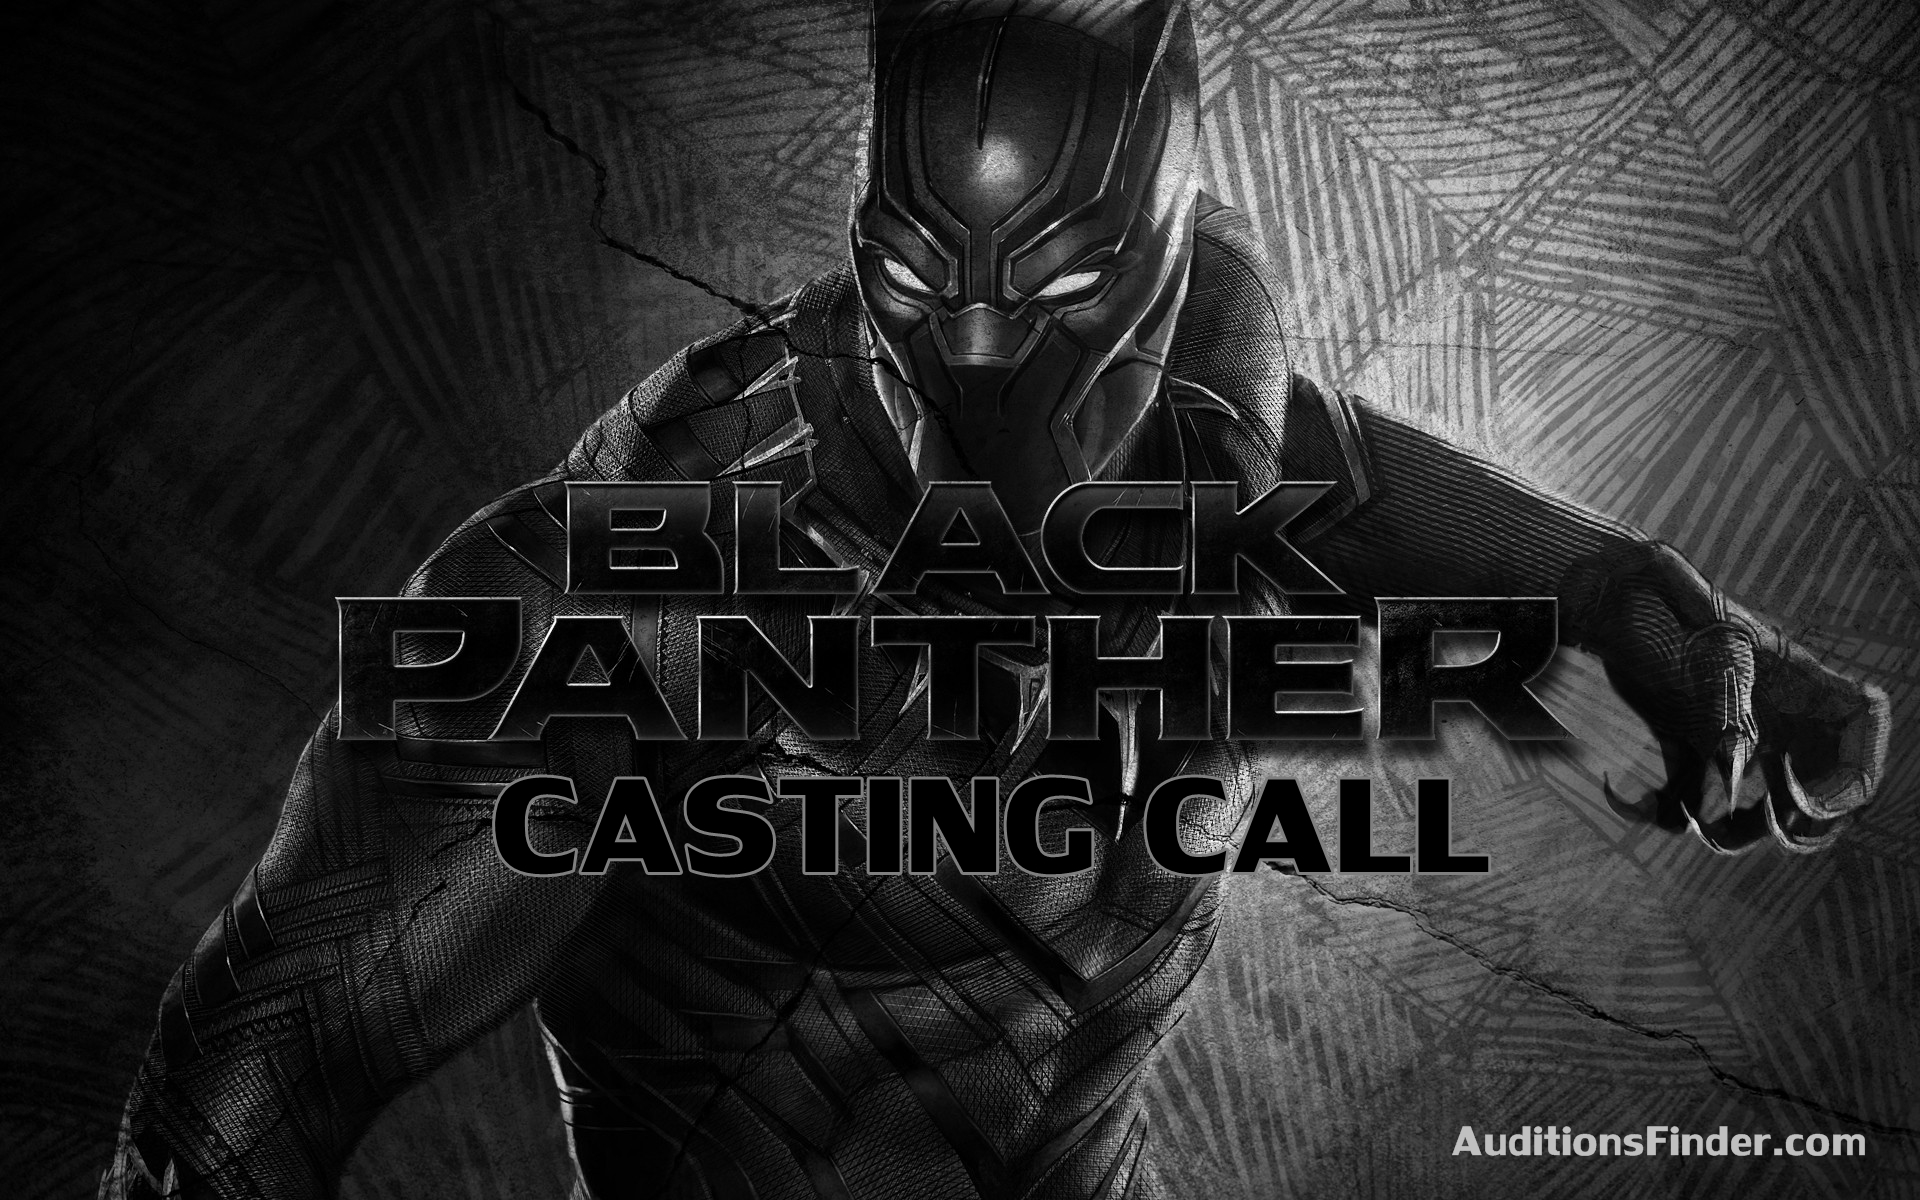 Marvel "Black Panther" Adults & Kids Auditions for 2019